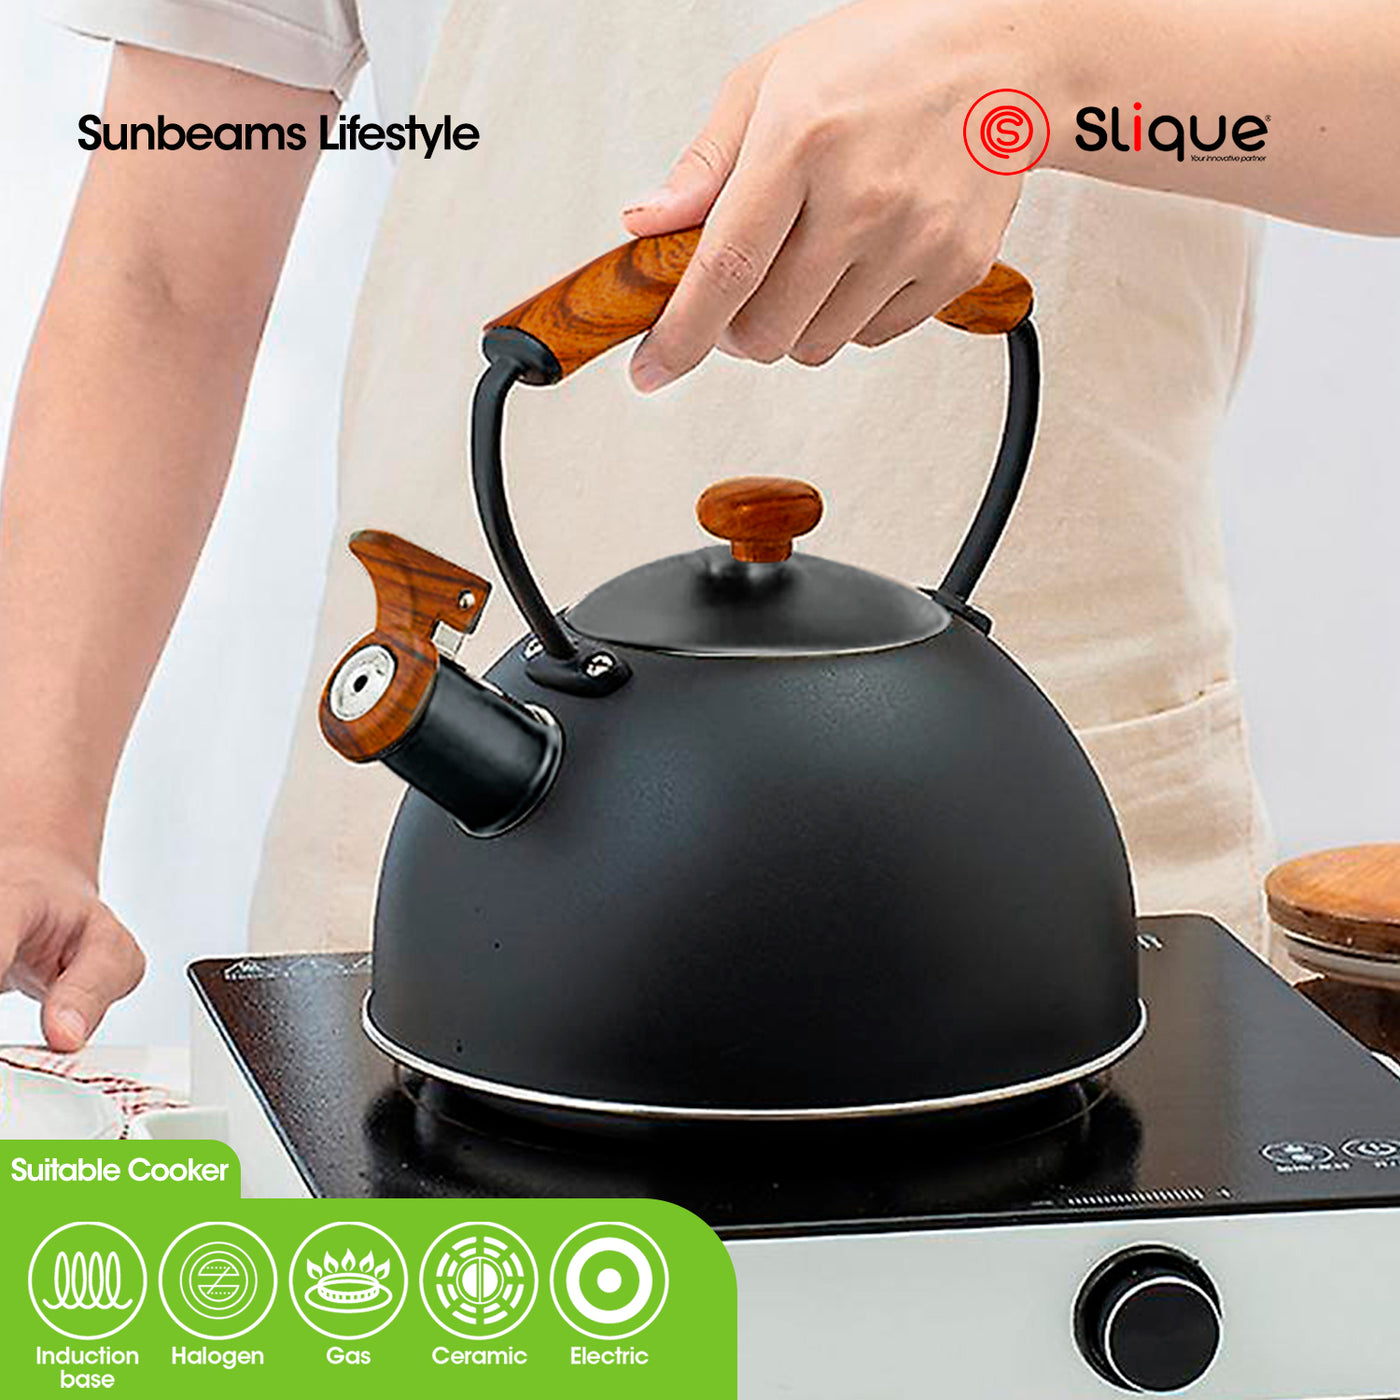 SLIQUE Whisting Kettle 2.5L - Stainless Steel Zen Collection